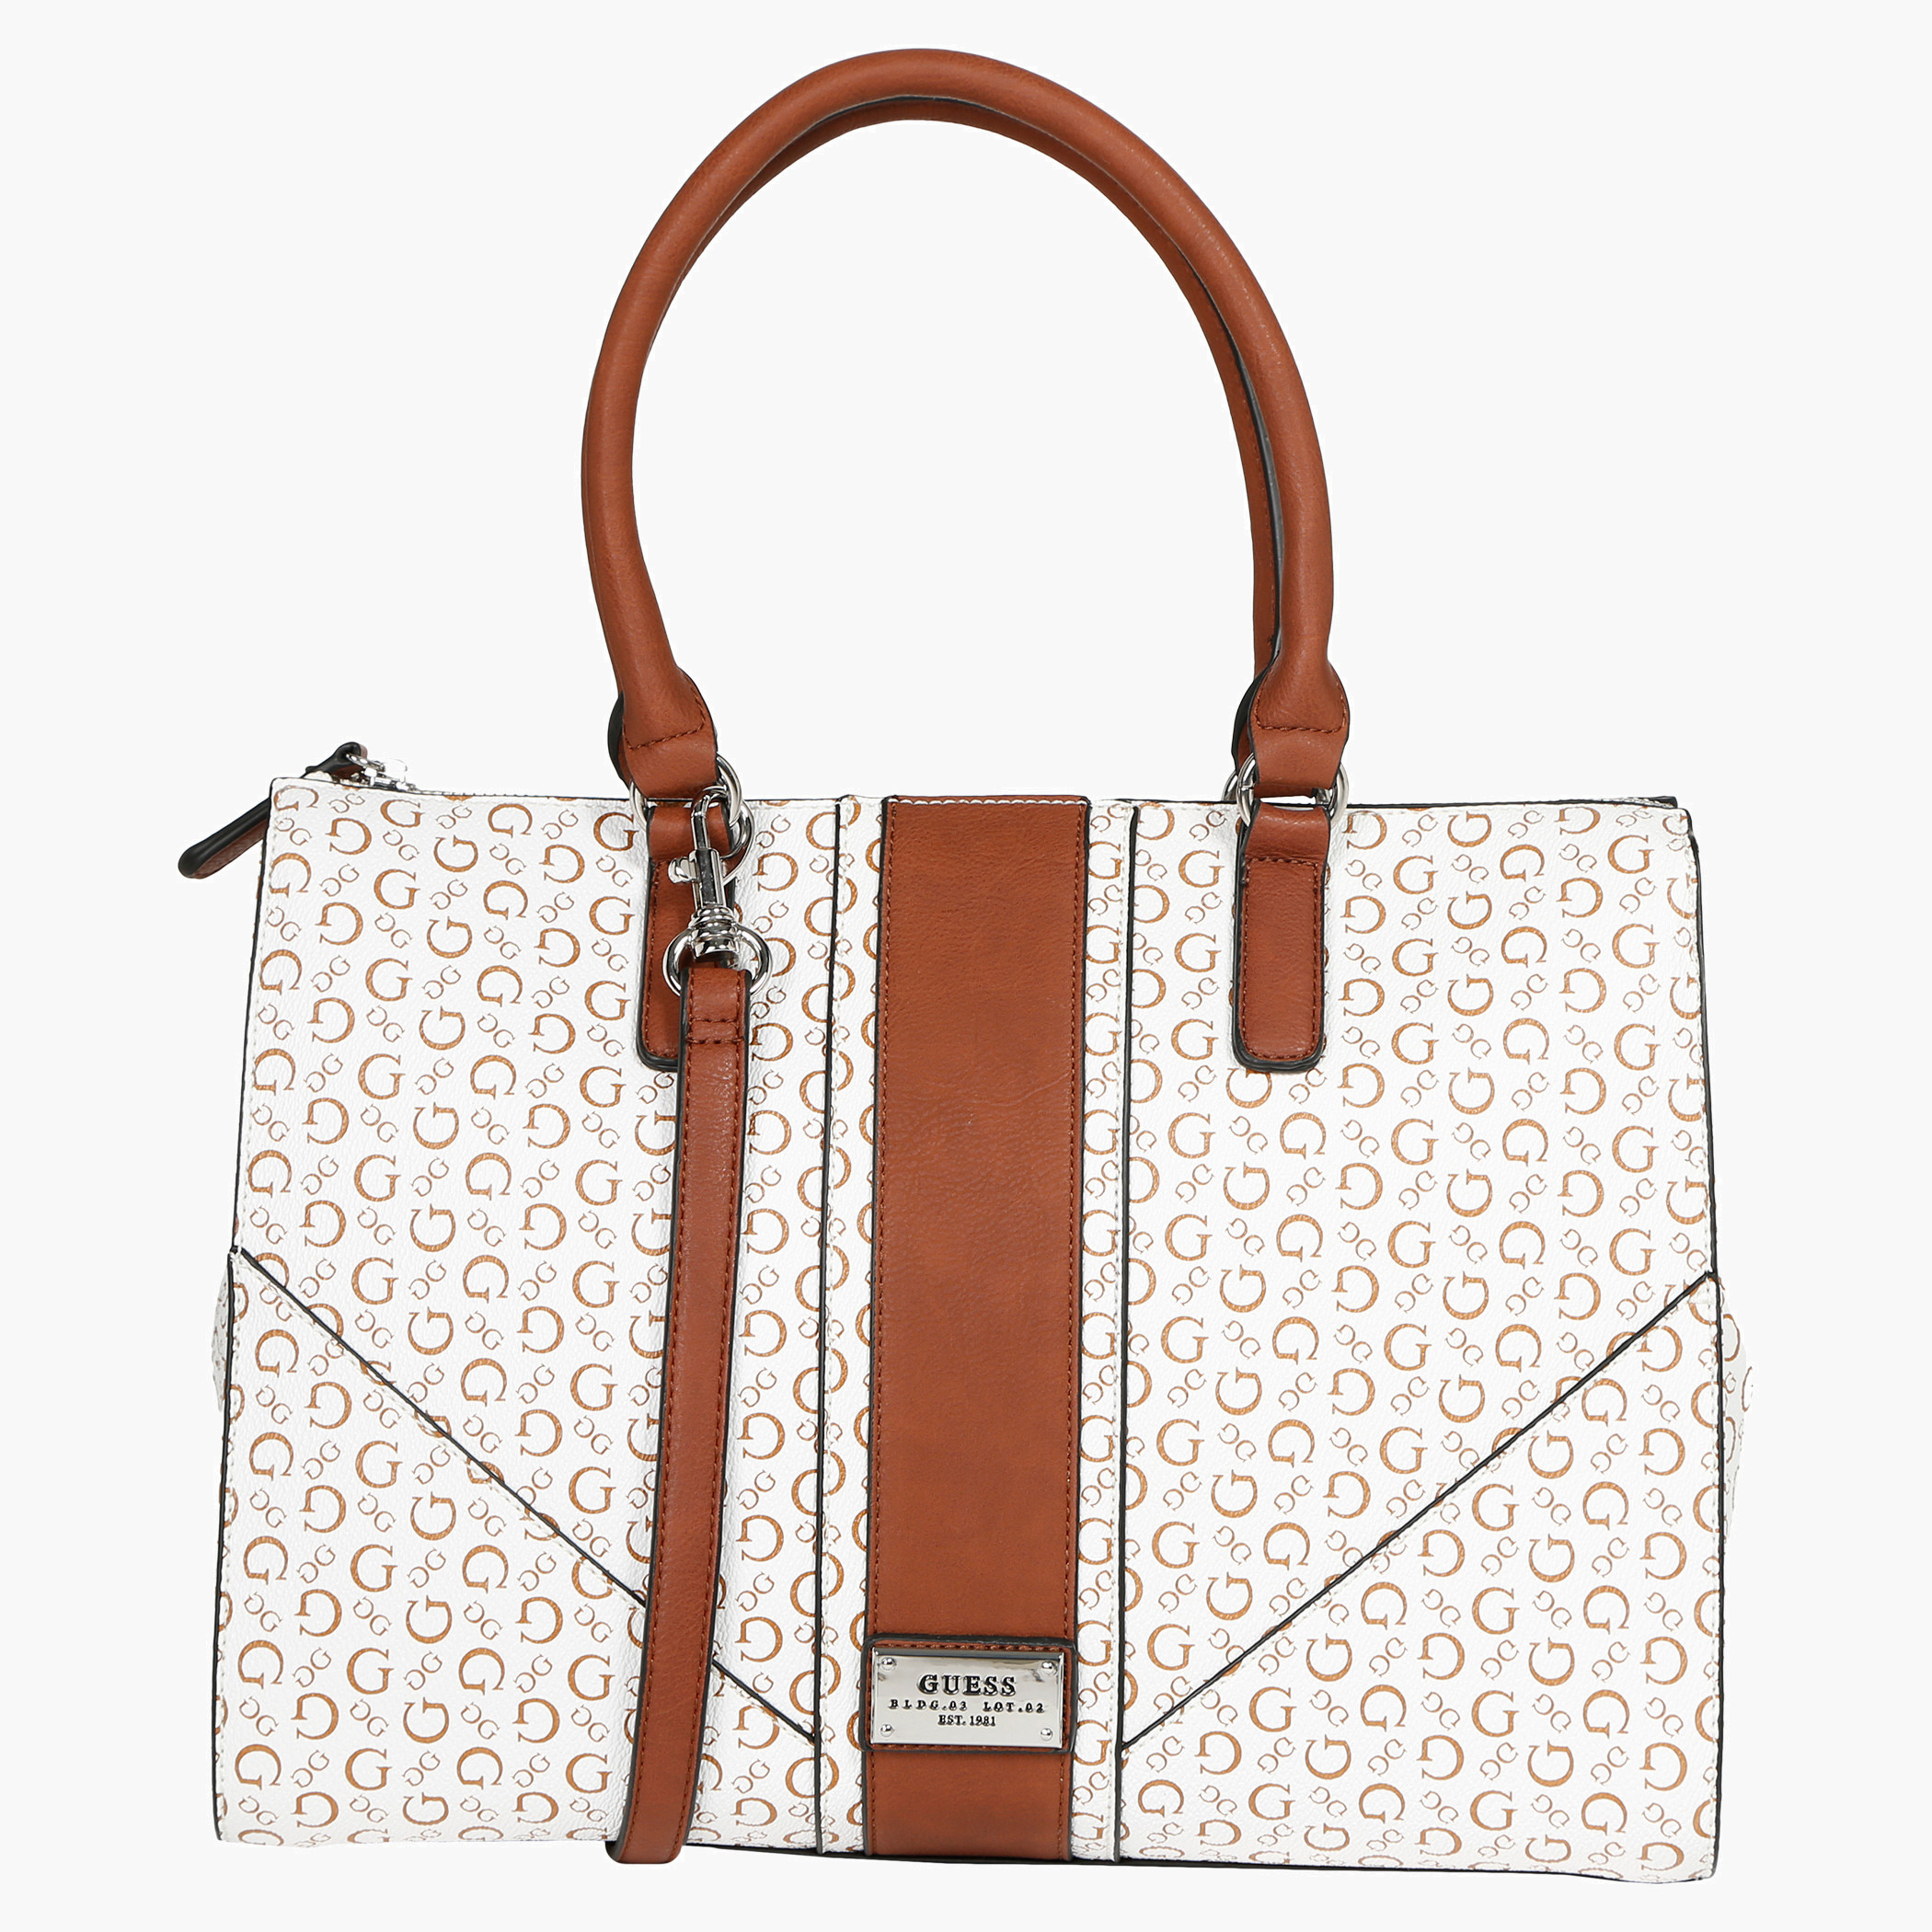 GUESS bag online shop - Free Delivery